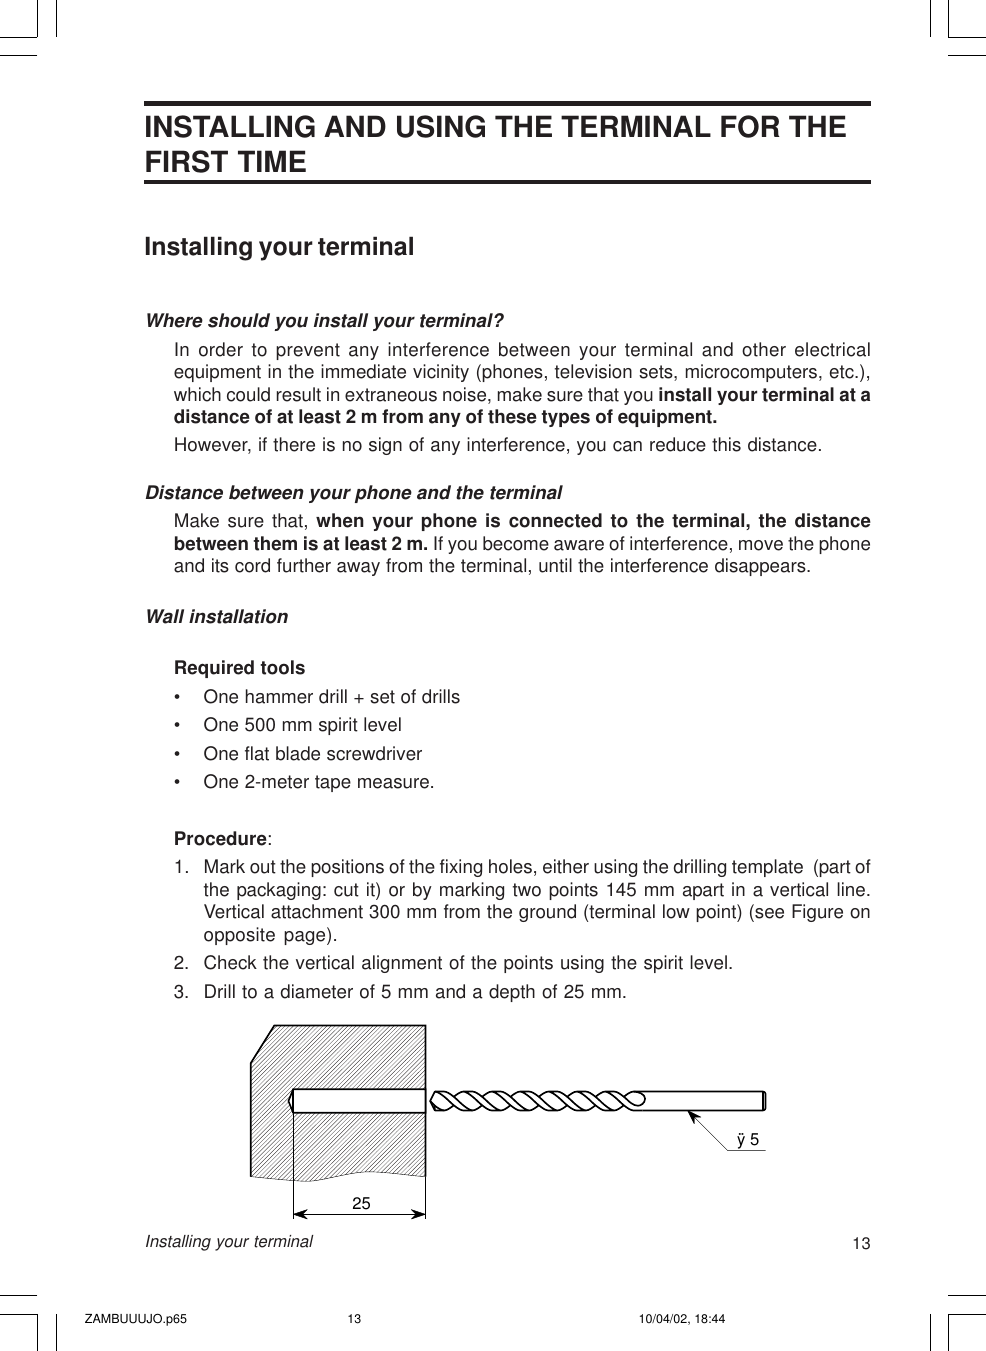 13Installing your terminalINSTALLING AND USING THE TERMINAL FOR THEFIRST TIMEInstalling your terminalWhere should you install your terminal?In order to prevent any interference between your terminal and other electricalequipment in the immediate vicinity (phones, television sets, microcomputers, etc.),which could result in extraneous noise, make sure that you install your terminal at adistance of at least 2 m from any of these types of equipment.However, if there is no sign of any interference, you can reduce this distance.Distance between your phone and the terminalMake sure that, when your phone is connected to the terminal, the distancebetween them is at least 2 m. If you become aware of interference, move the phoneand its cord further away from the terminal, until the interference disappears.Wall installationRequired tools• One hammer drill + set of drills• One 500 mm spirit level• One flat blade screwdriver• One 2-meter tape measure.Procedure:1. Mark out the positions of the fixing holes, either using the drilling template  (part ofthe packaging: cut it) or by marking two points 145 mm apart in a vertical line.Vertical attachment 300 mm from the ground (terminal low point) (see Figure onopposite page).2. Check the vertical alignment of the points using the spirit level.3. Drill to a diameter of 5 mm and a depth of 25 mm.ÿ 525ZAMBUUUJO.p65 10/04/02, 18:4413